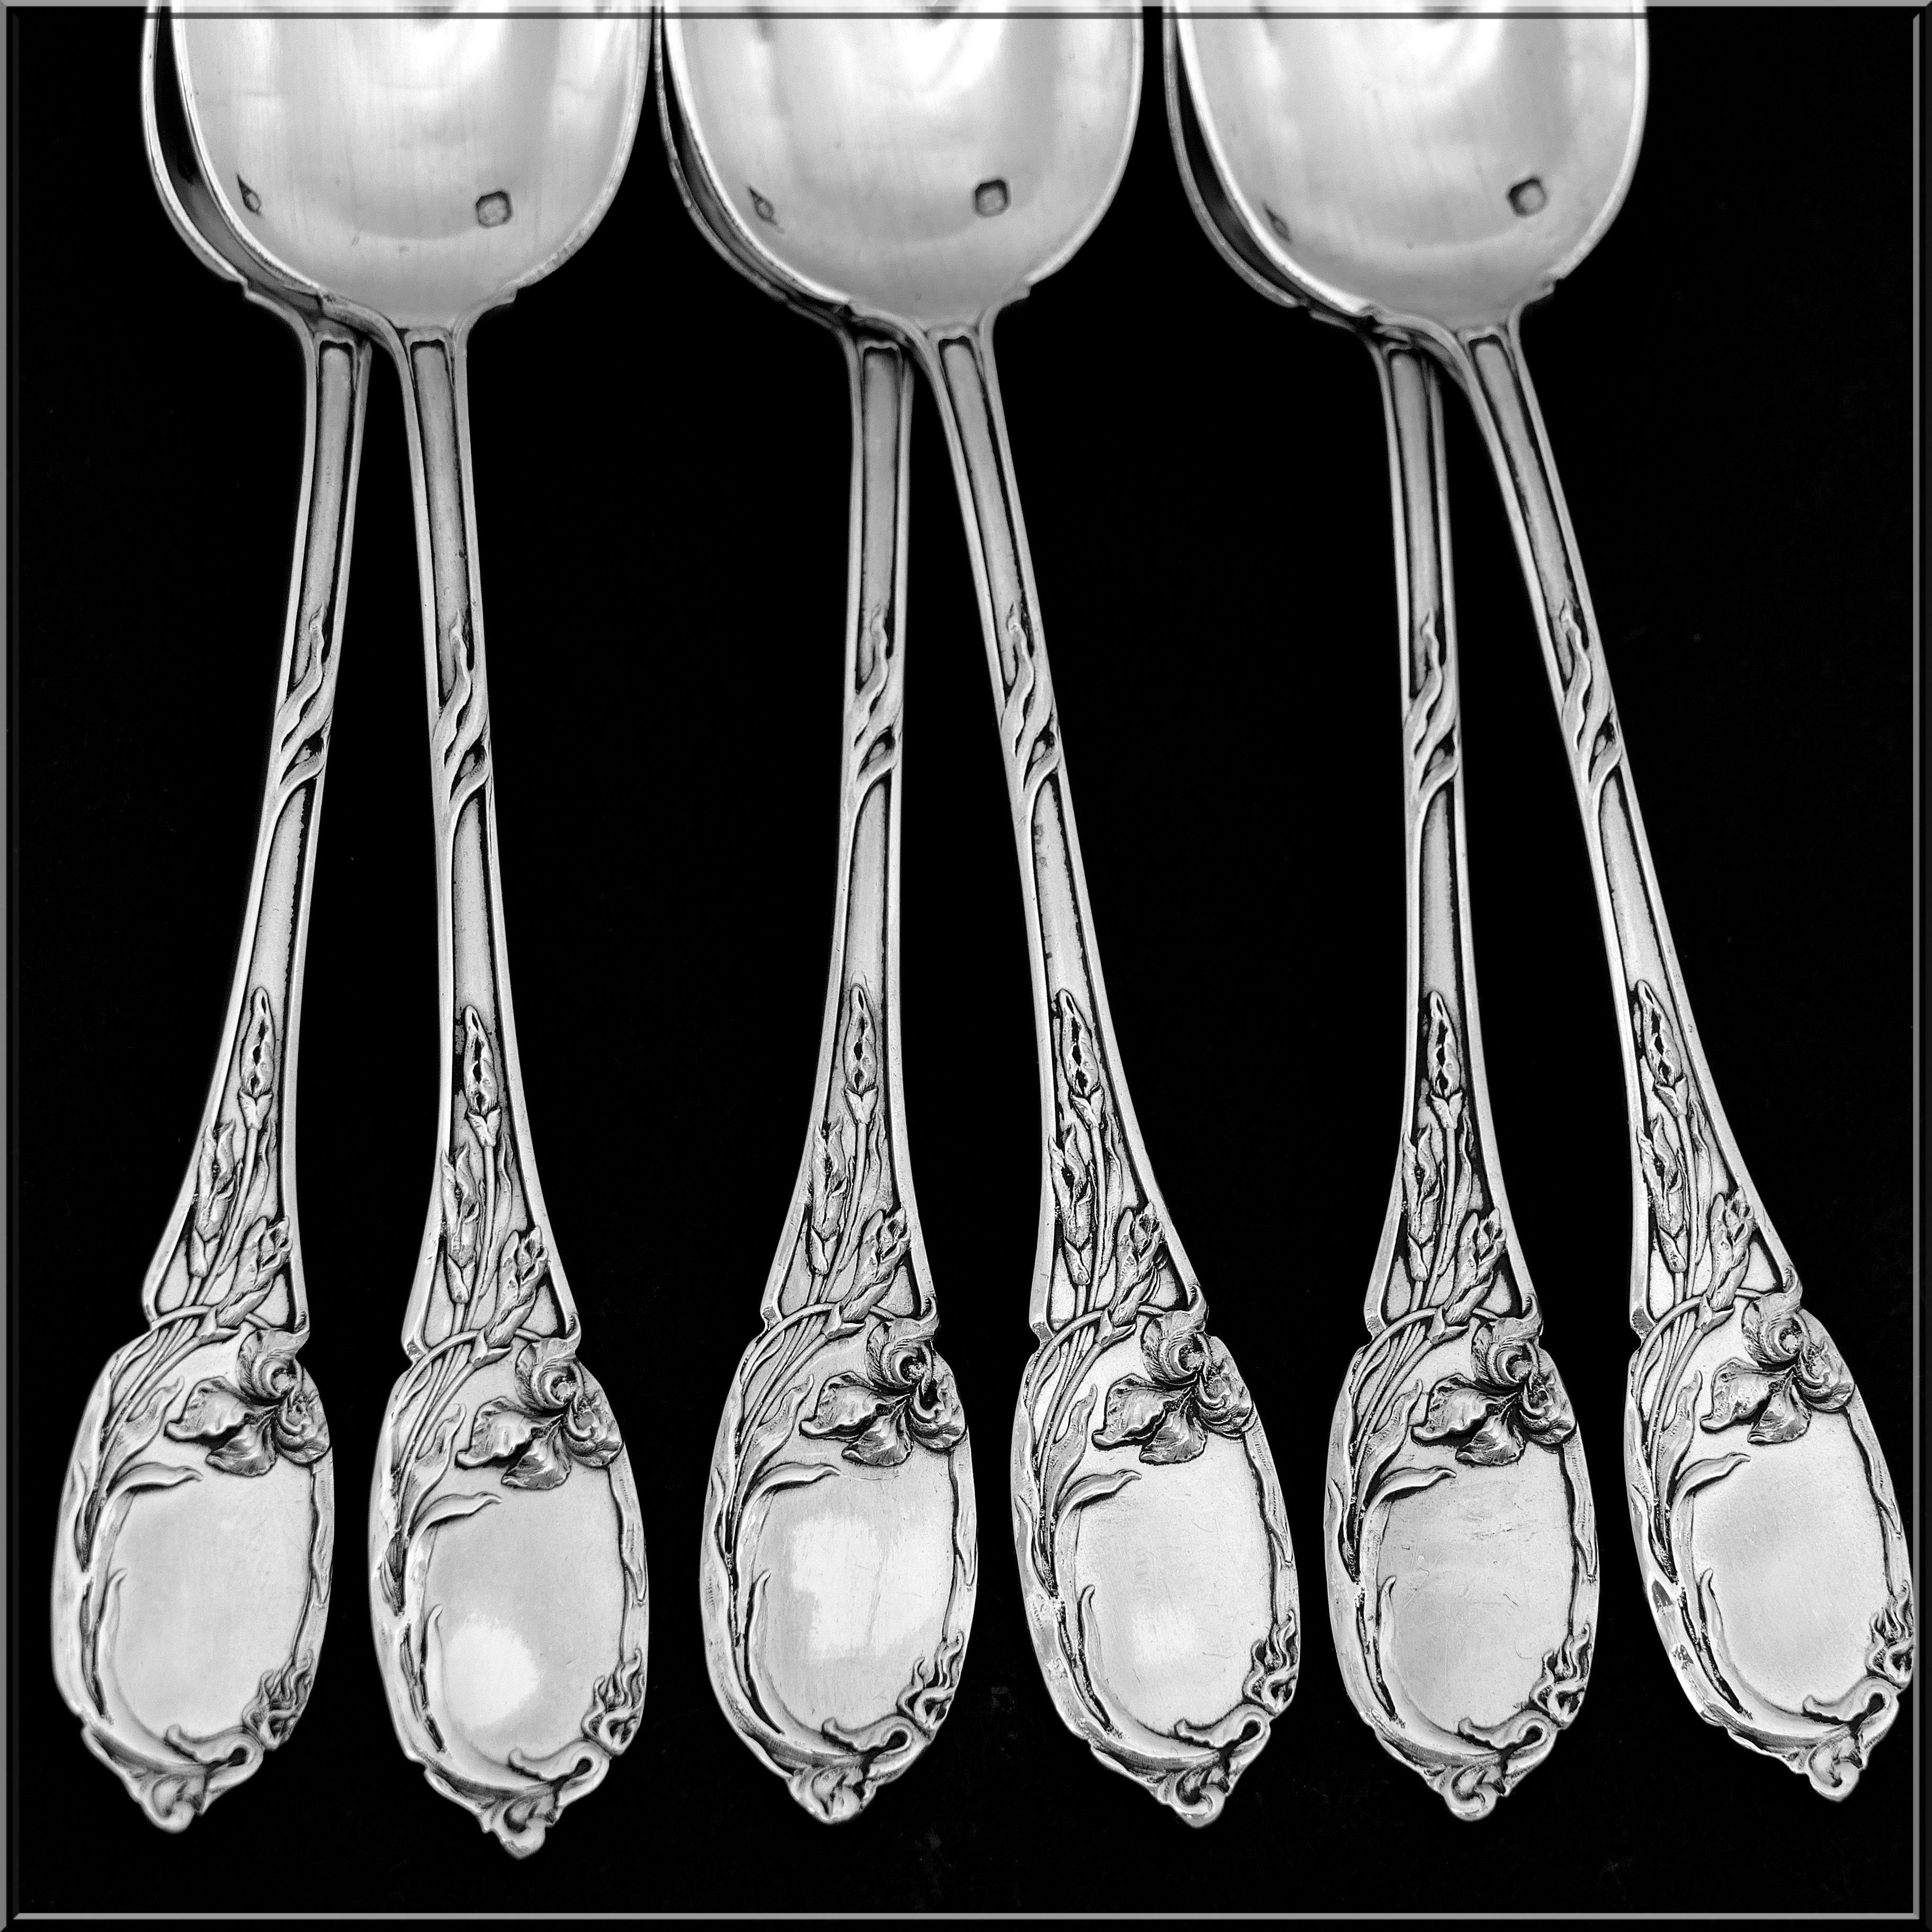 Early 20th Century Tirbour Rare French Sterling Silver Dessert Coffee Spoons Set 6 Pc, Iris